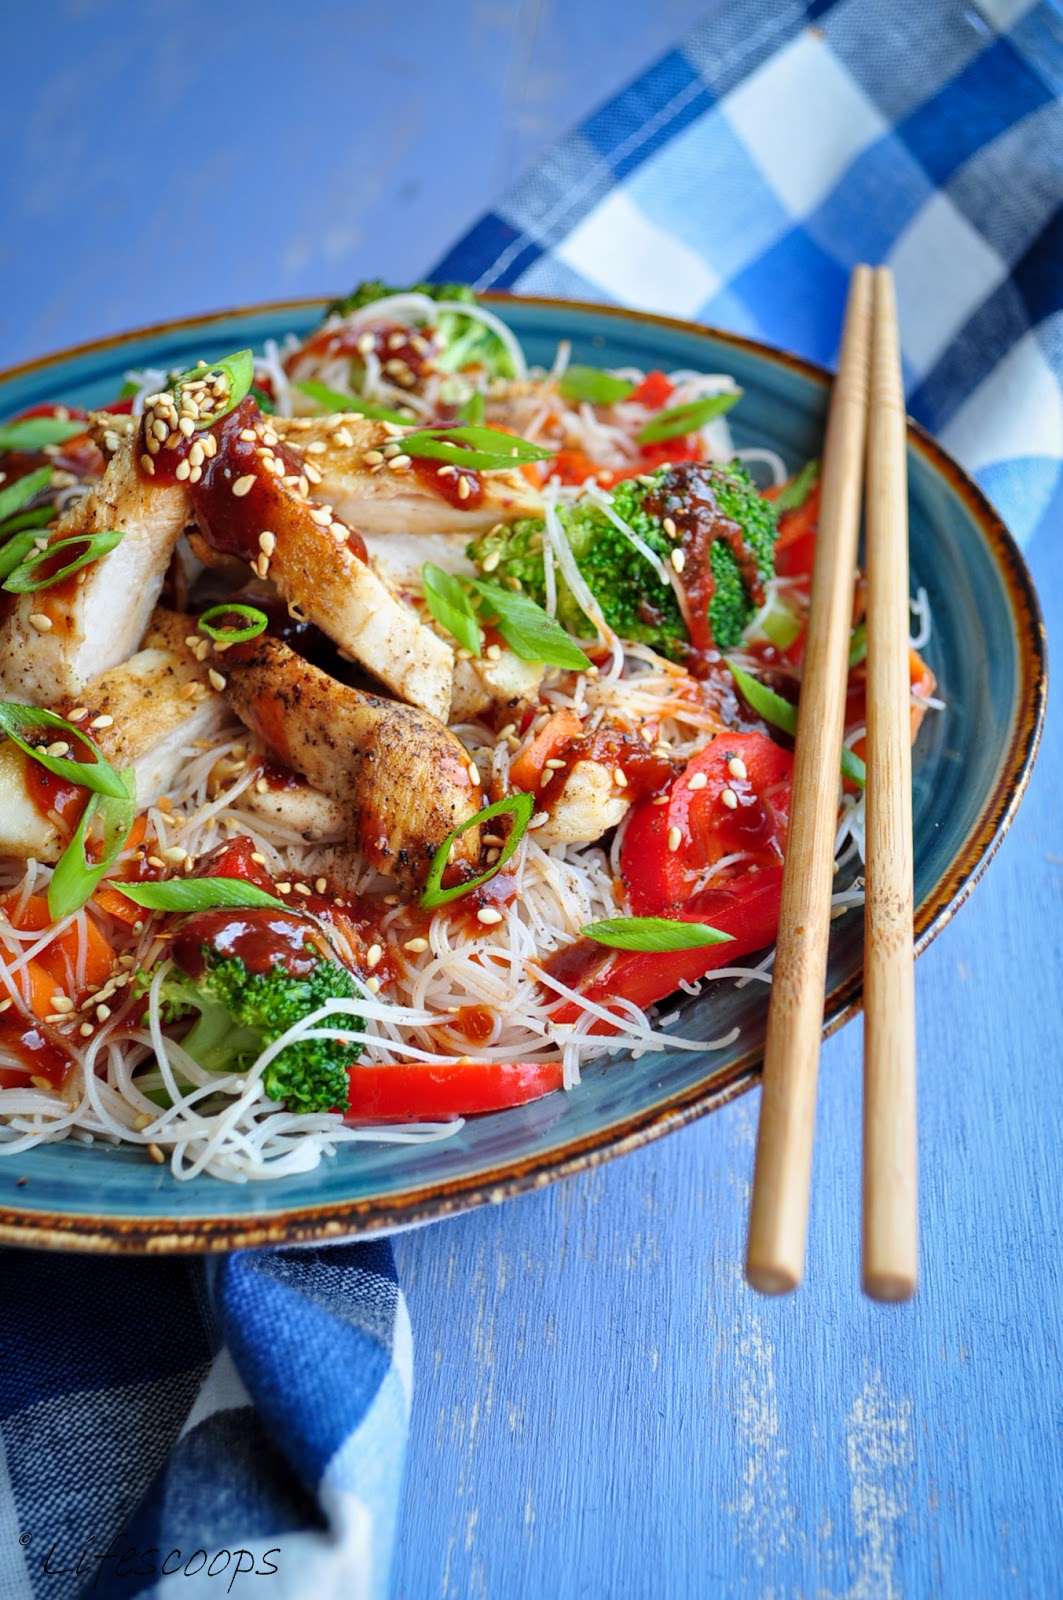 Life Scoops: Vermicelli Rice Noodles with Stir-fried Chicken and ...